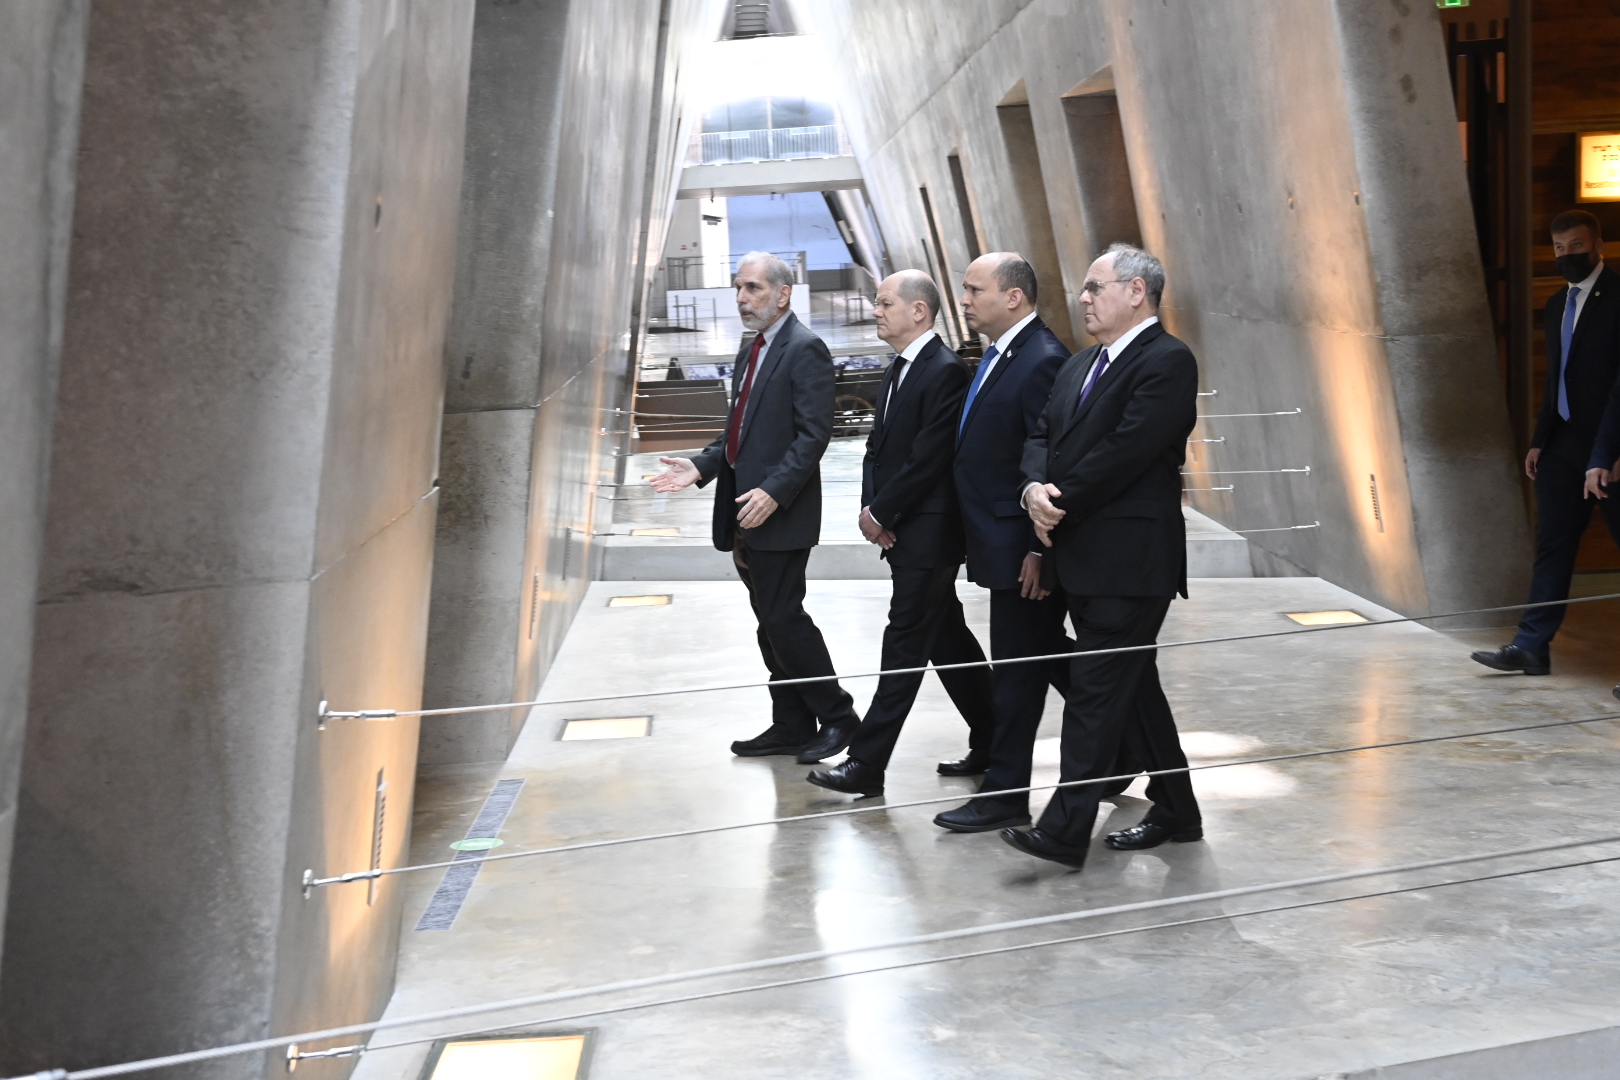 German Chancellor Olaf Scholz receiving a private tour of Yad Vashem’s Holocaust History Museum, along with Chairman Dani Dayan and Prime Minister Naftali Bennett